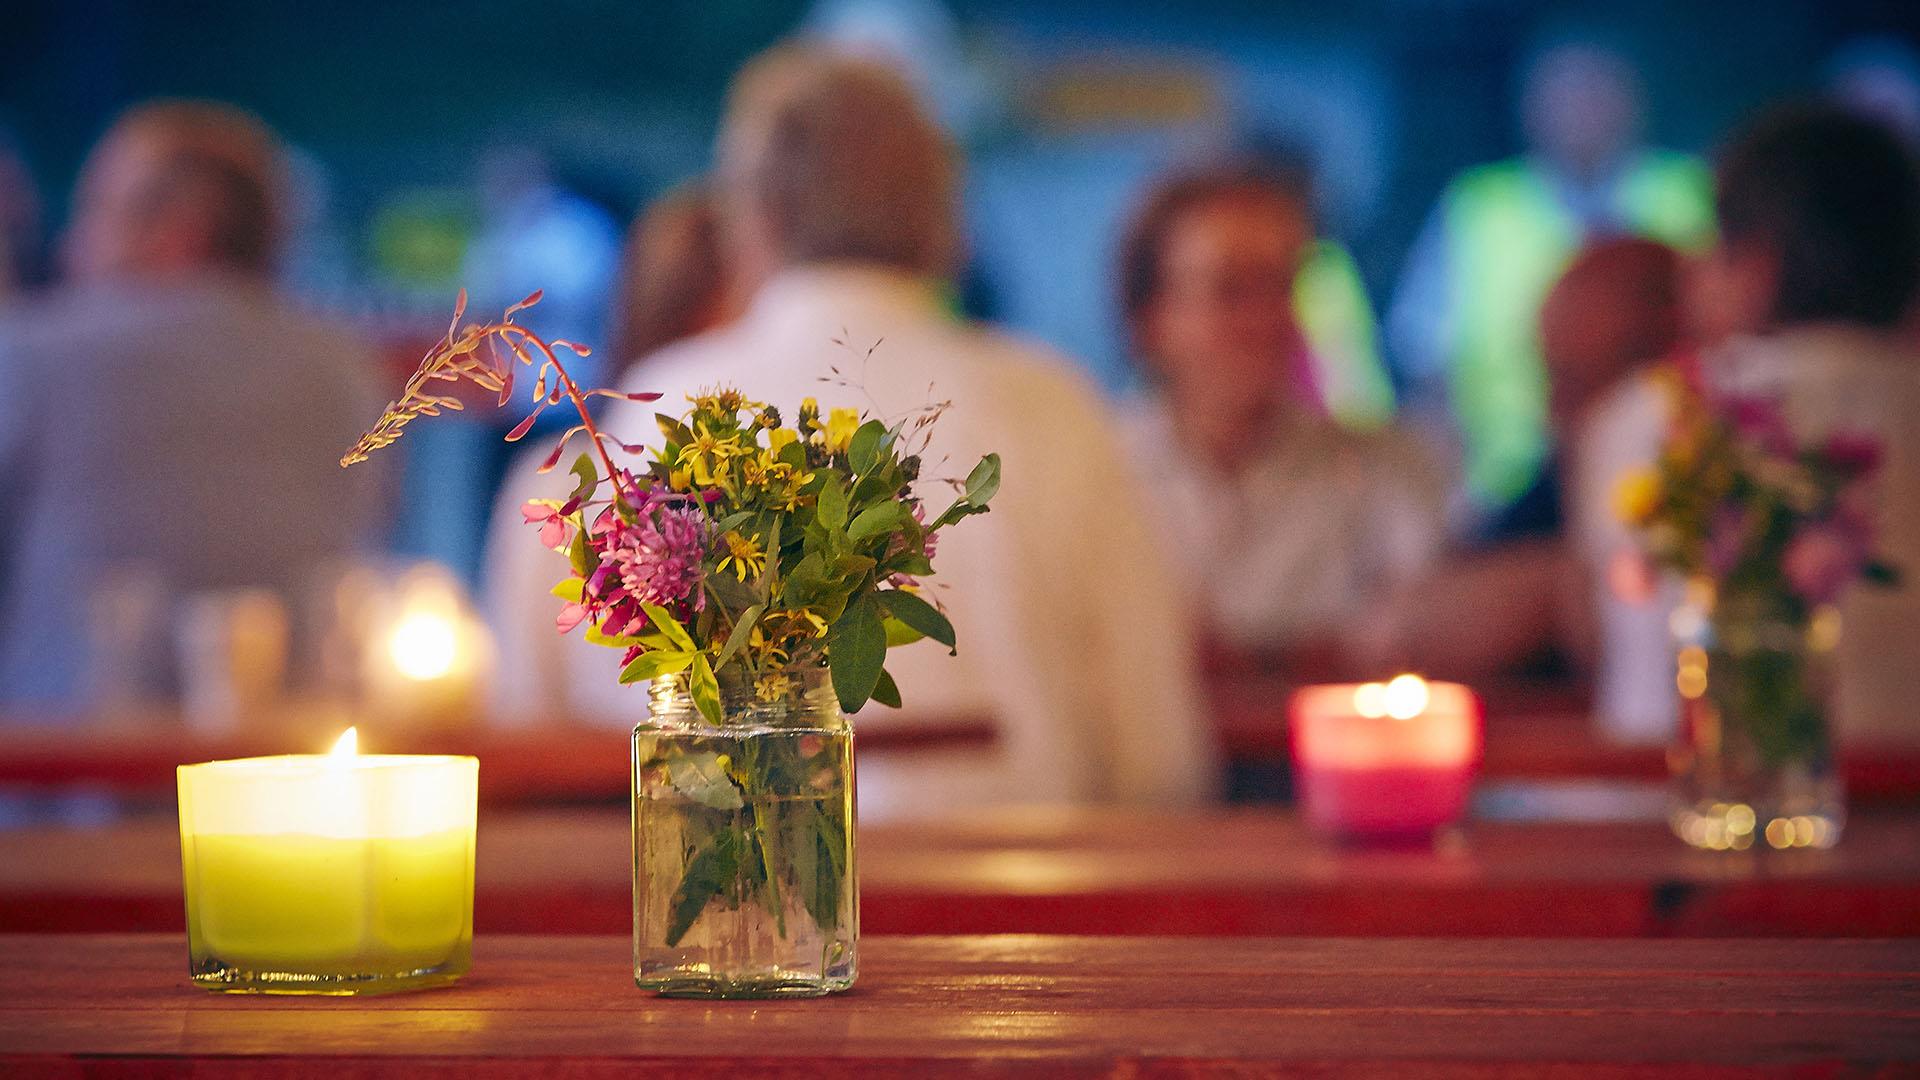 Meadow flowers in a glass and tee candles on a table during a warm summer night in the foreground, while people in a merry festival mood are seen unsharp in the background.